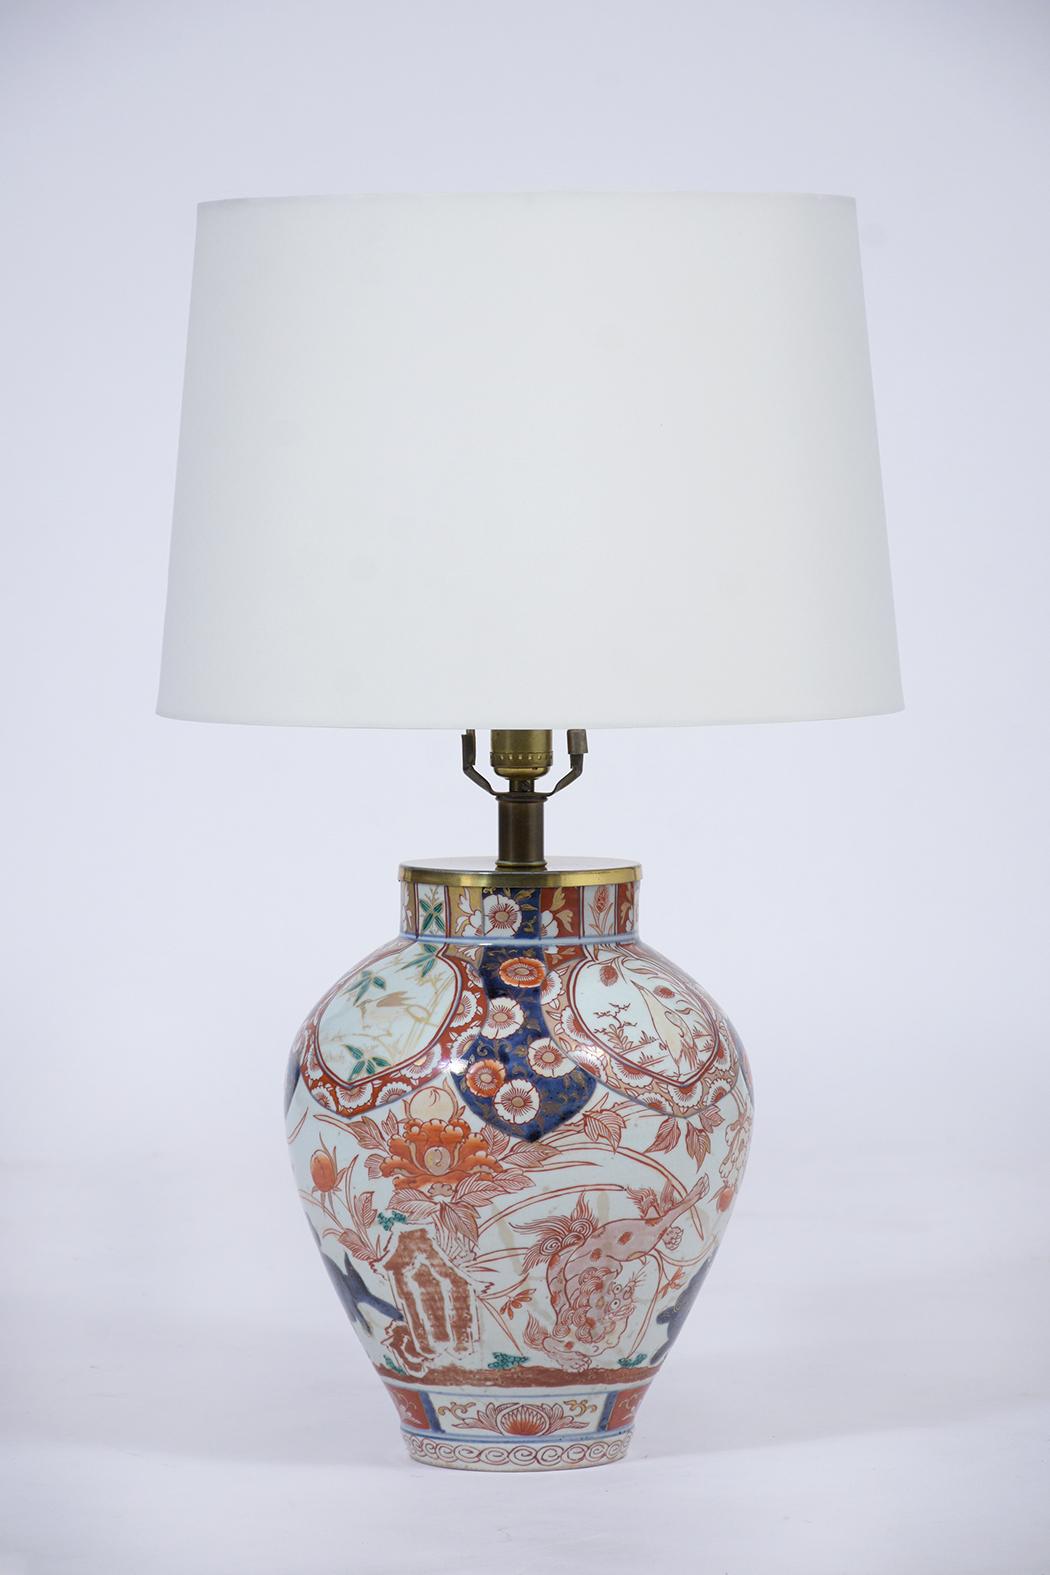 This pair of Chinese Porcelain table lamps are in great condition, are wired to US standards and are in working condition. Each lamp features a vase-shaped base with a colorful floral and animal design, brass lighting hardware, and brand new white